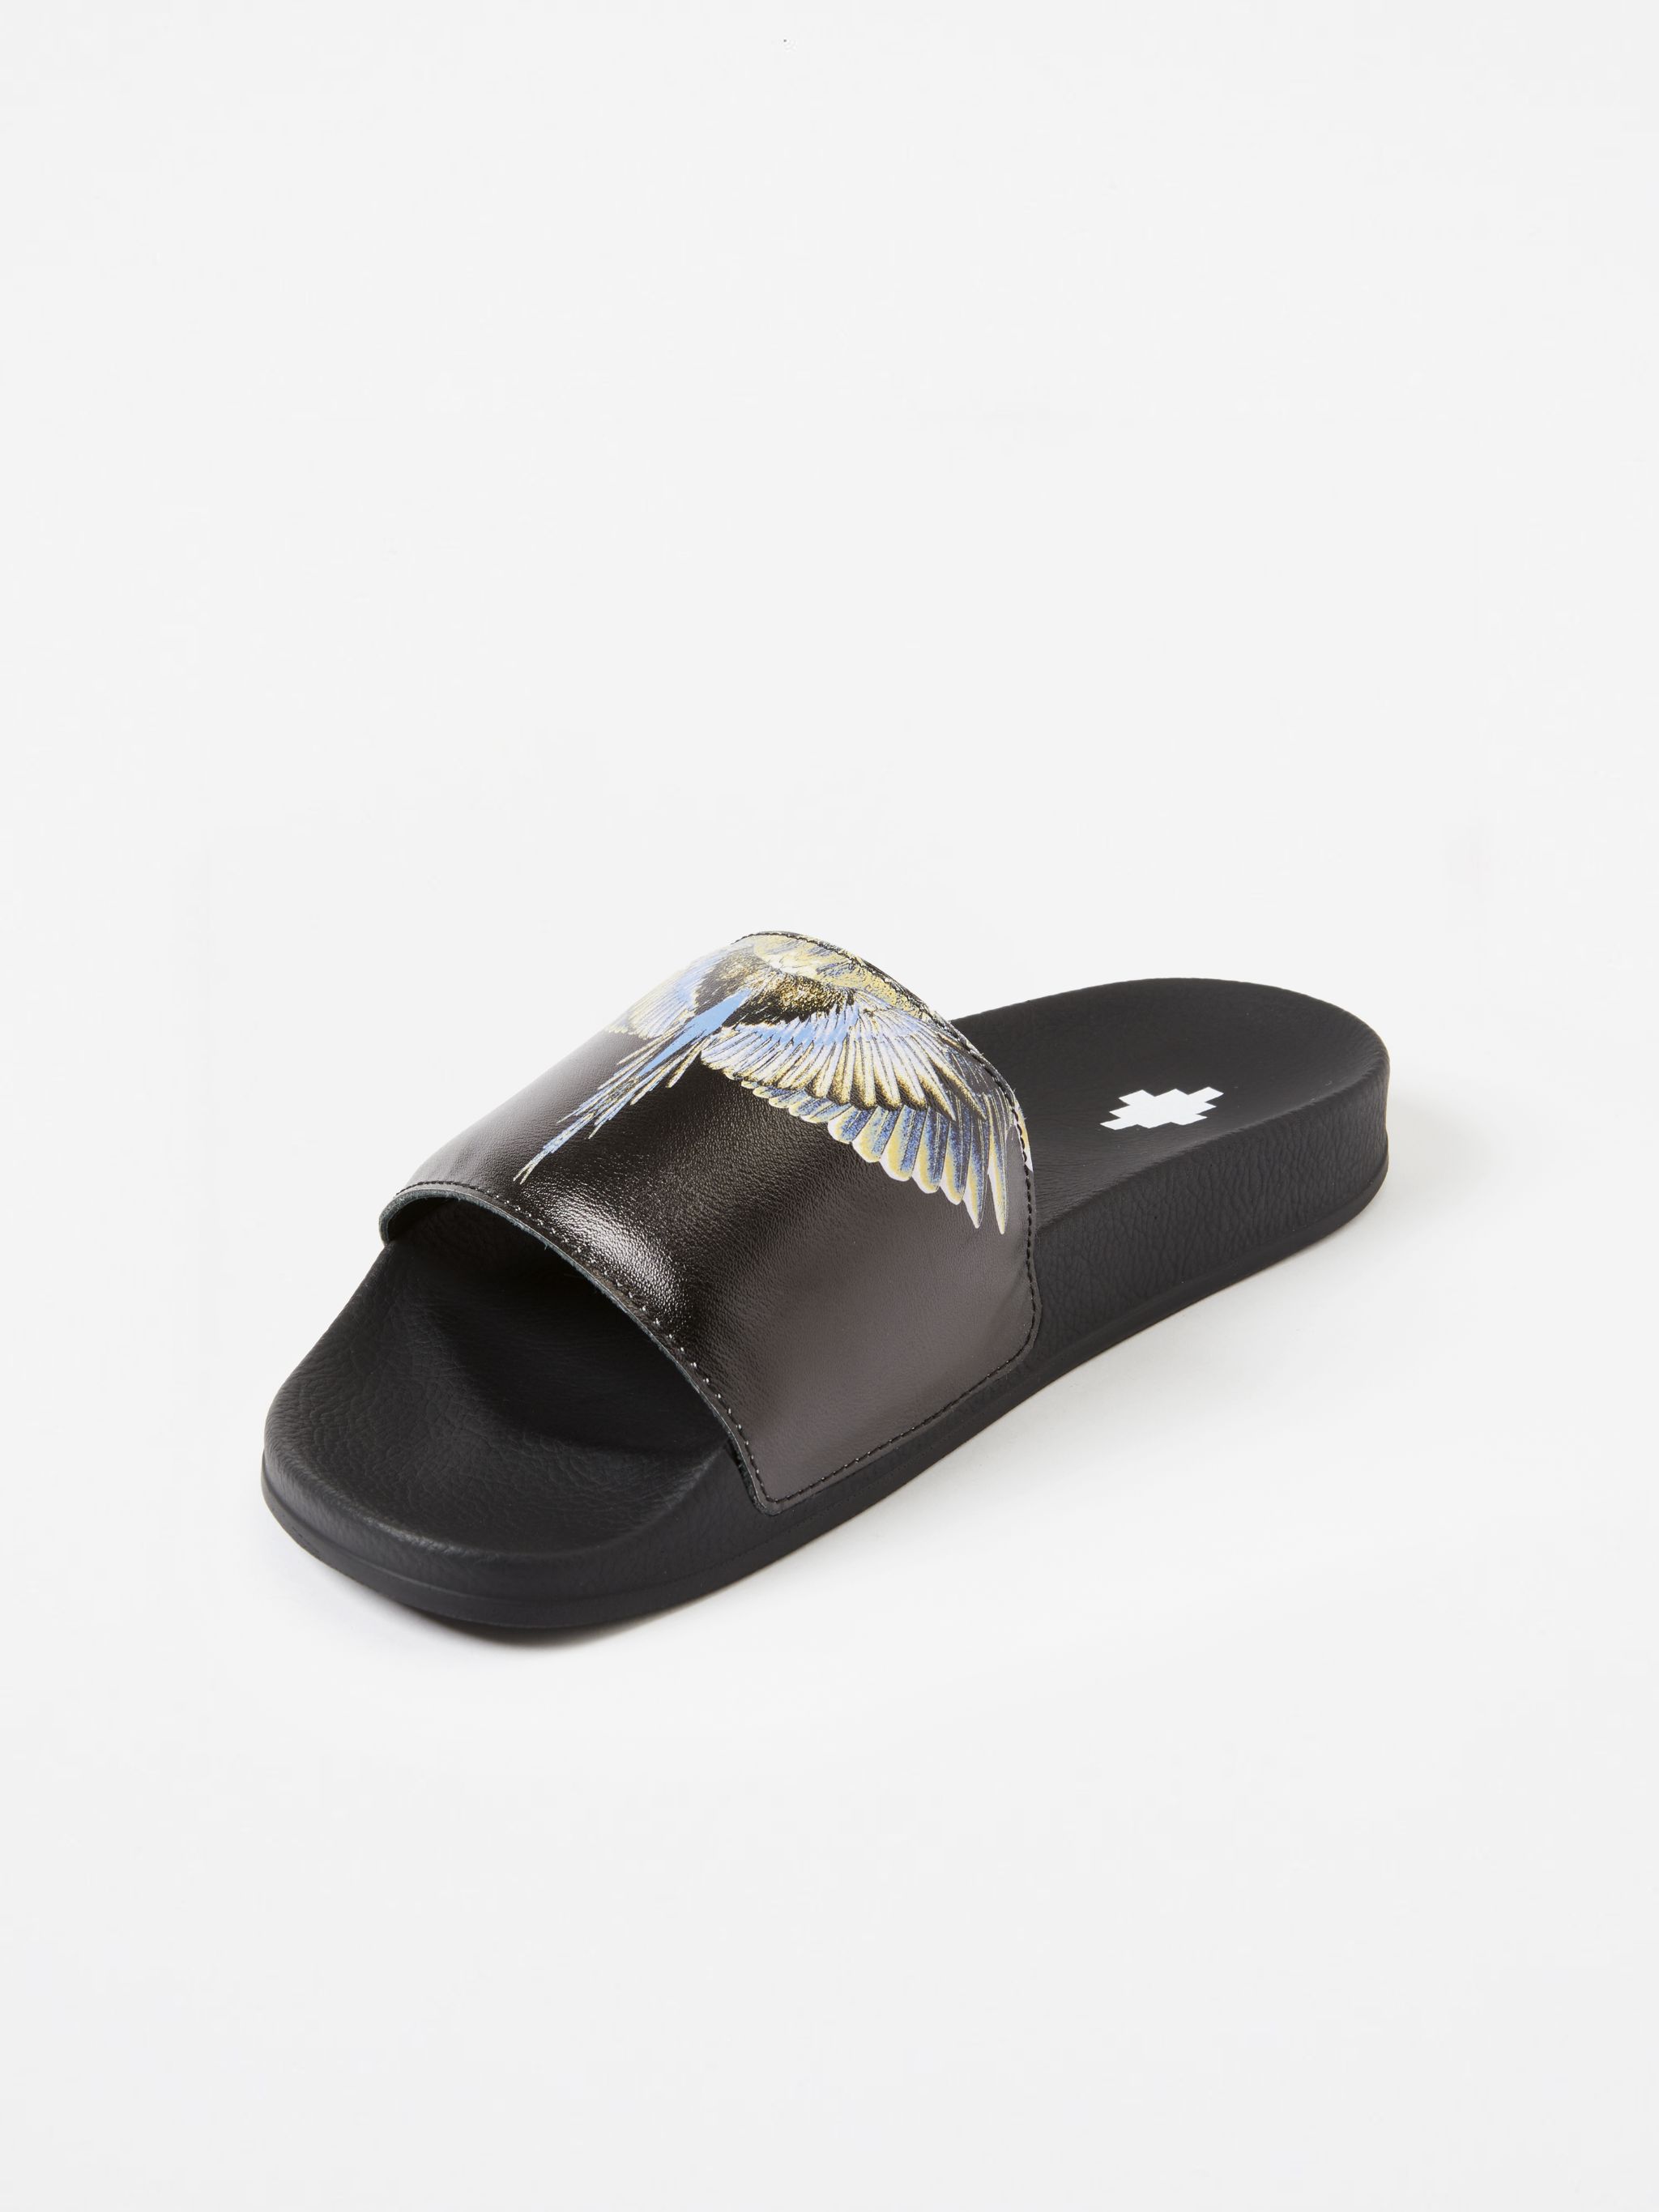 black/multicolour leather slip-on style feather print